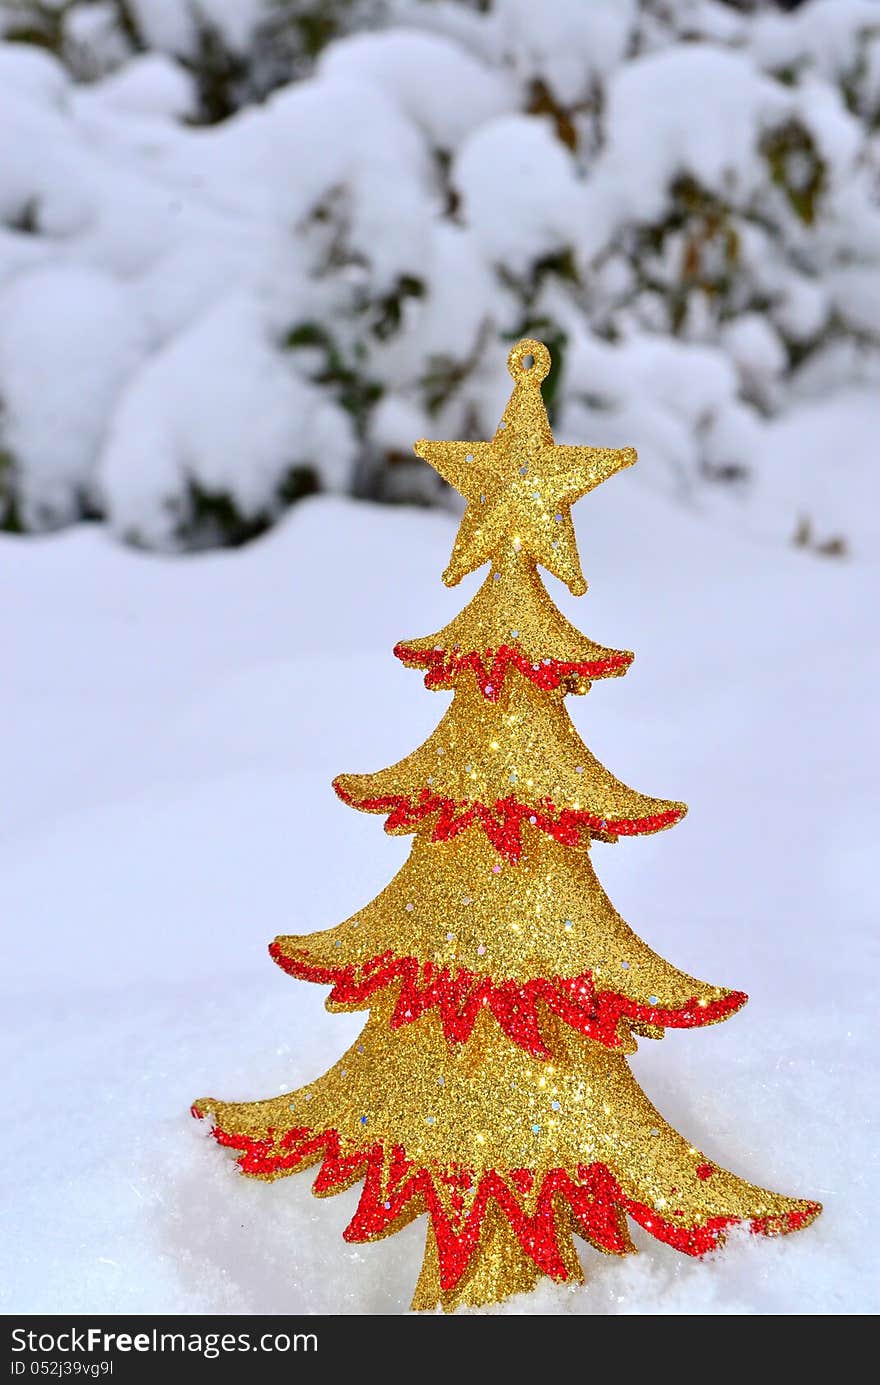 Image of a Christmas tree ornament on snow